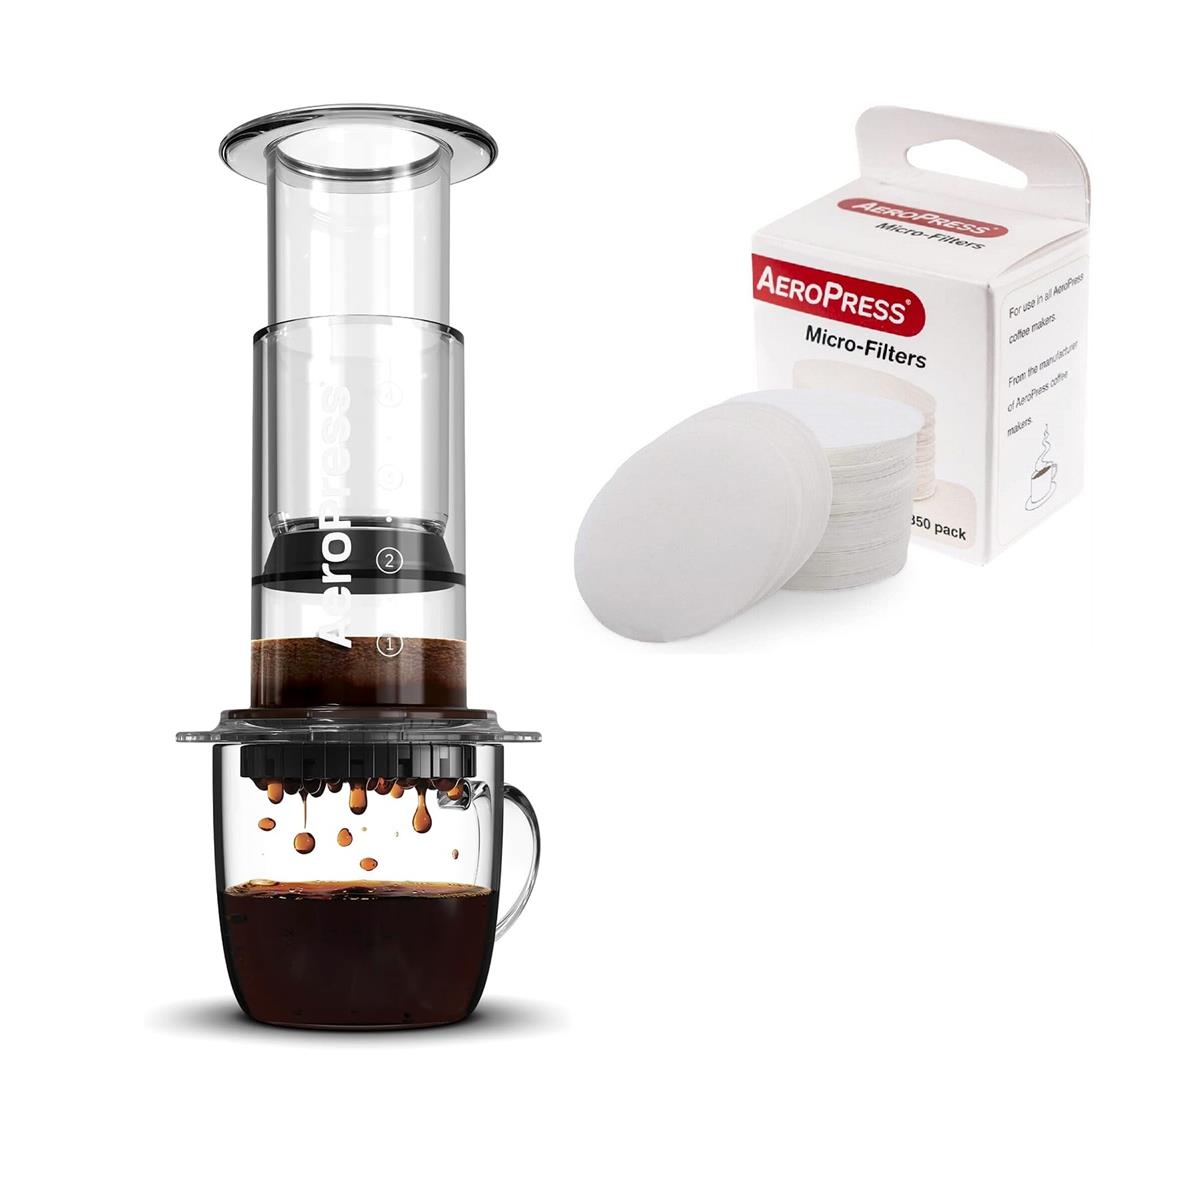 AeroPress - New Special Bundle with Clear Coffee Maker (Transparent) + 350 Microfilters